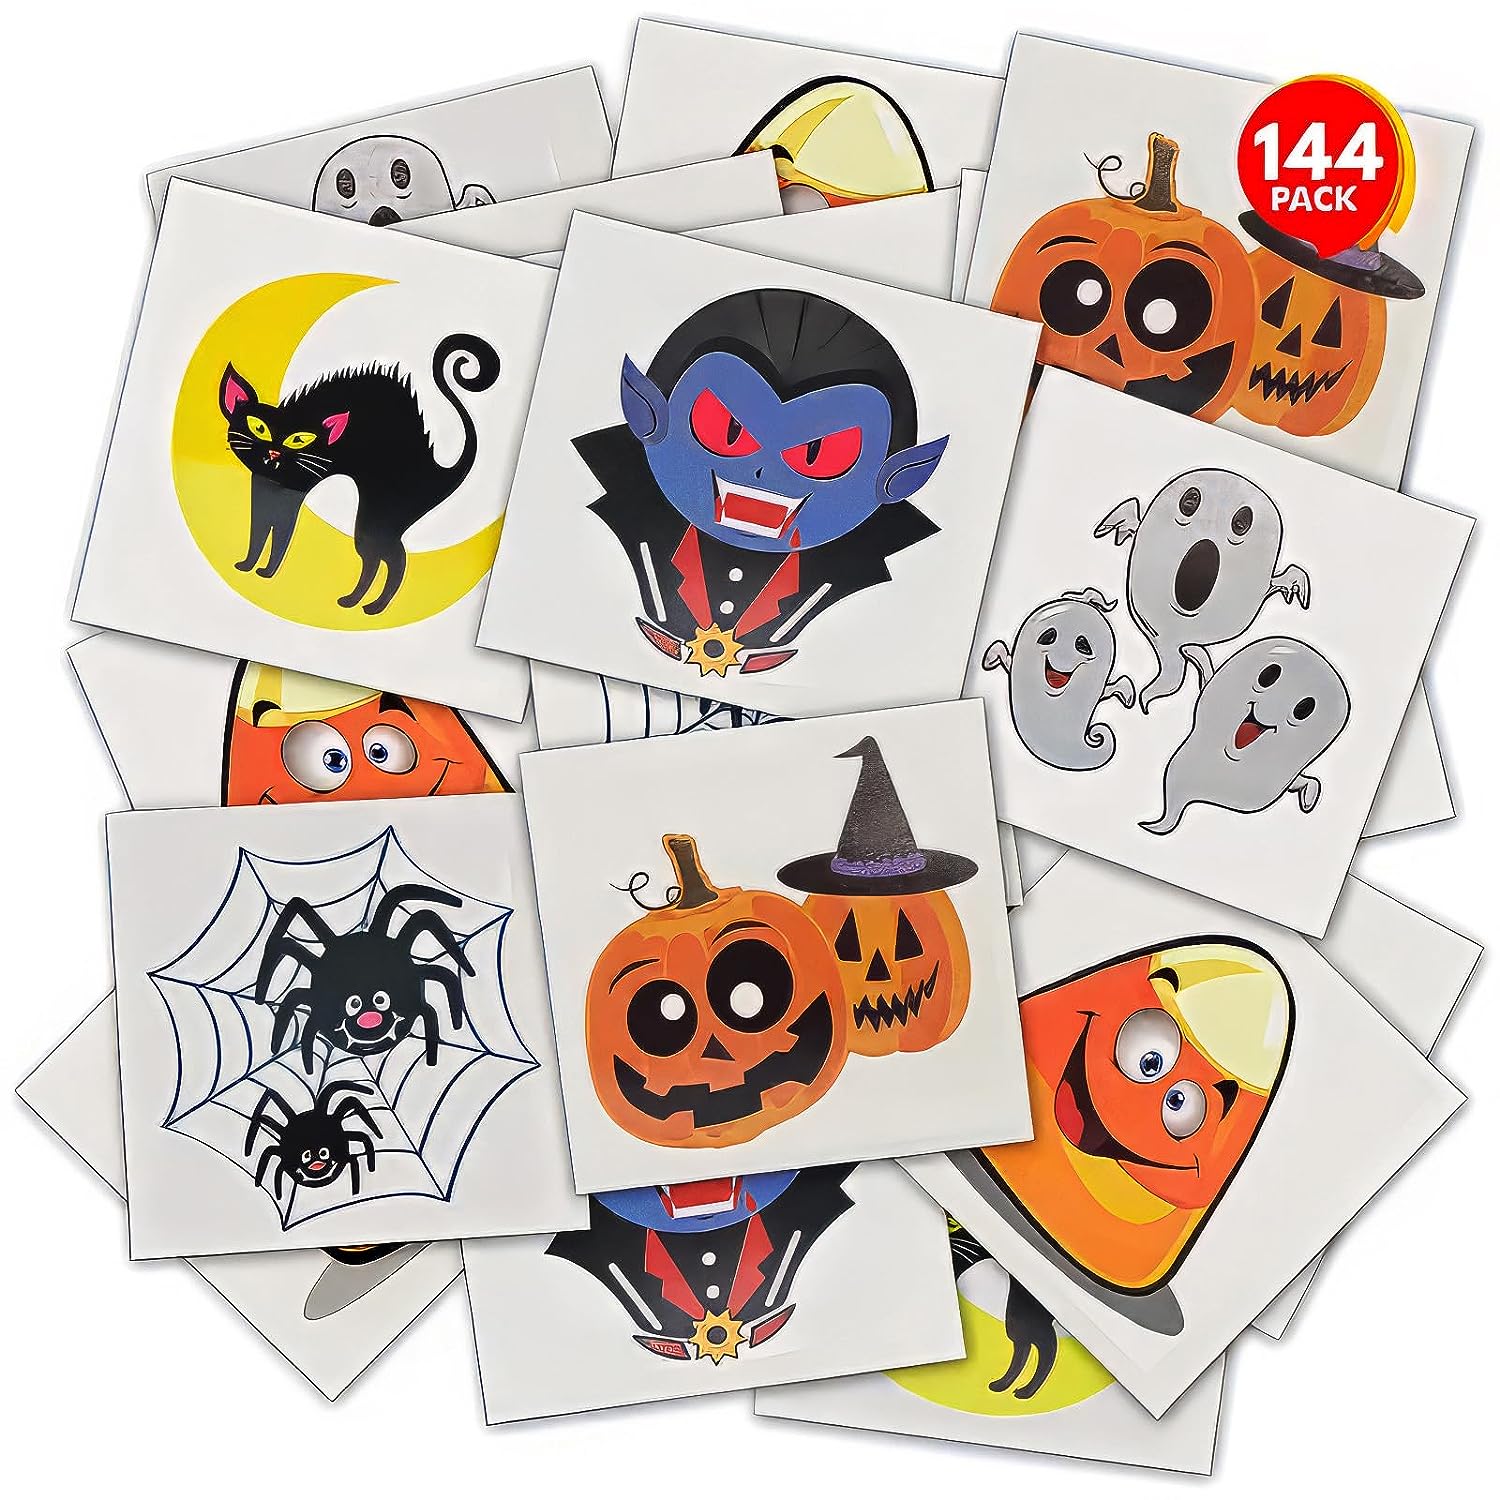 Halloween Temporary Tattoos for Kids - Pack of 144 $5.99